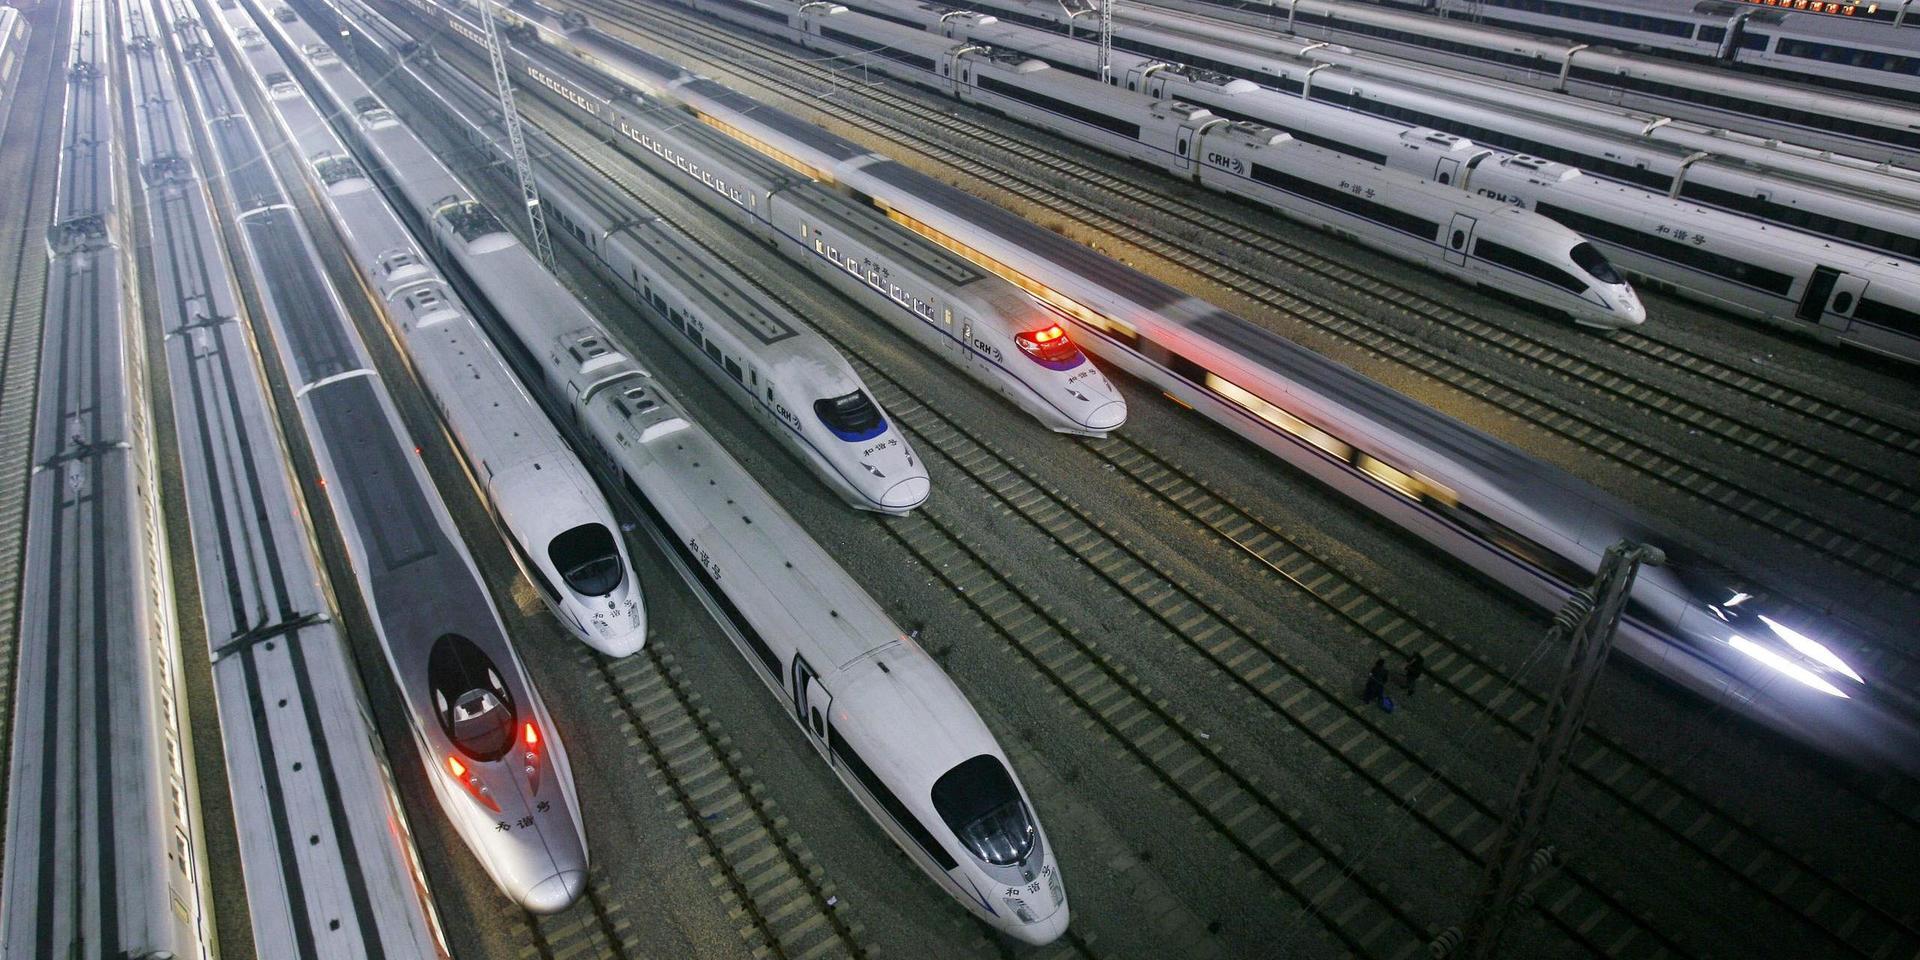 China's CRH high-speed trains sit on tracks at a maintenance base in Wuhan, in central China's Hubei province, Wednesday Jan. 11, 2012. (AP Photo)  CHINA OUT